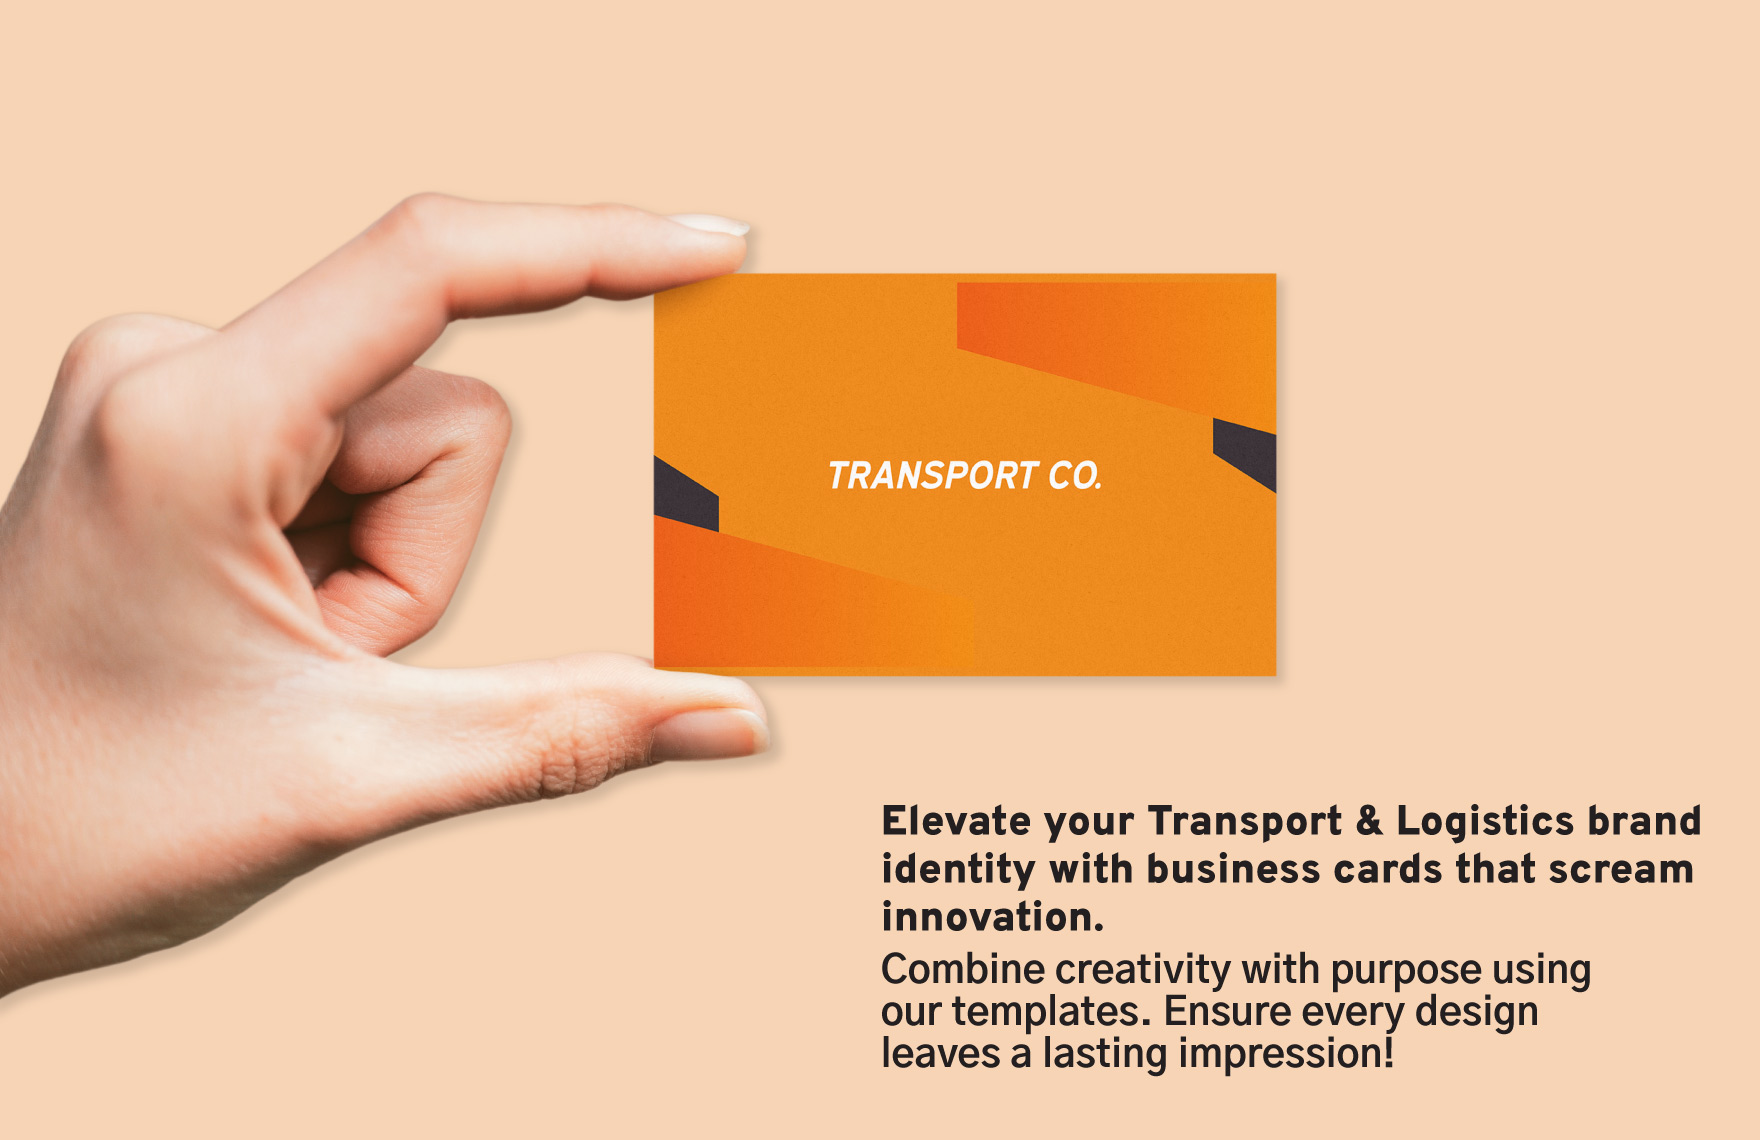 Transport and Logistics Supply Chain Consultant Business Card Template